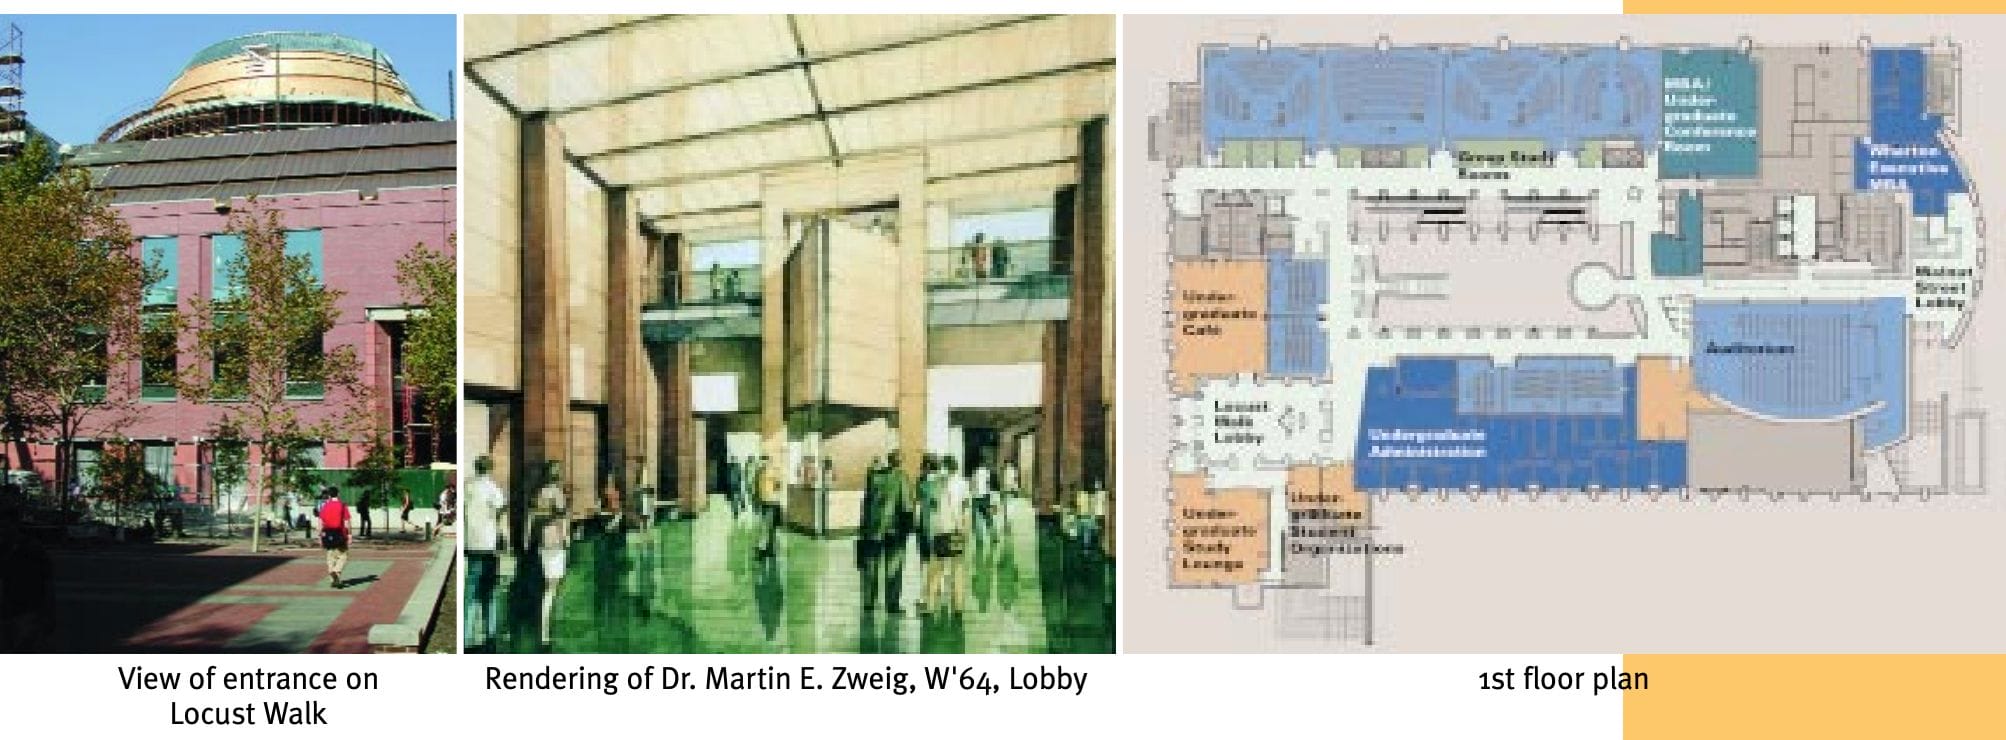 A collage of three separate images of Huntsman Hall. First image on the far left shows Huntsman Hall being constructed. Center image shows the rendering of the Lobby of the building. Far right image shows the floor plan of the first floor